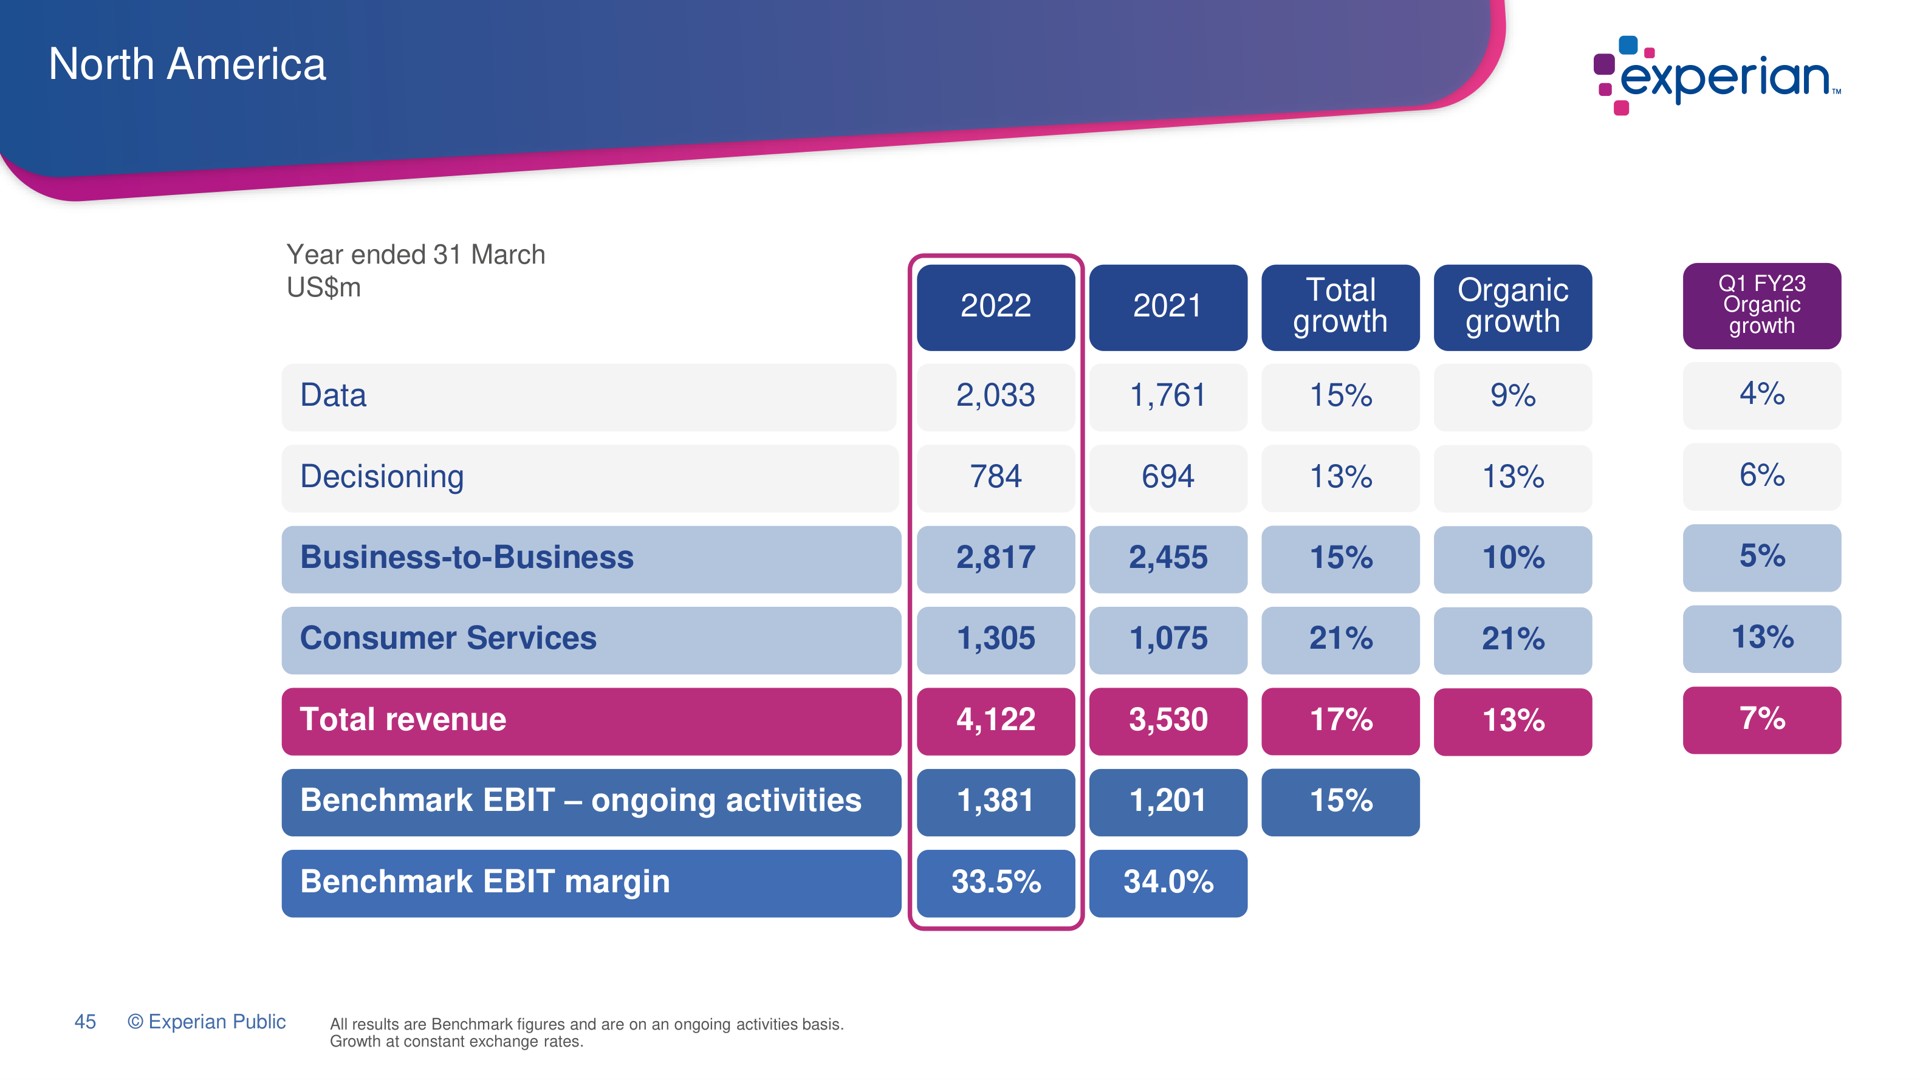 north data total growth organic growth business to business consumer services total revenue ongoing activities margin | Experian